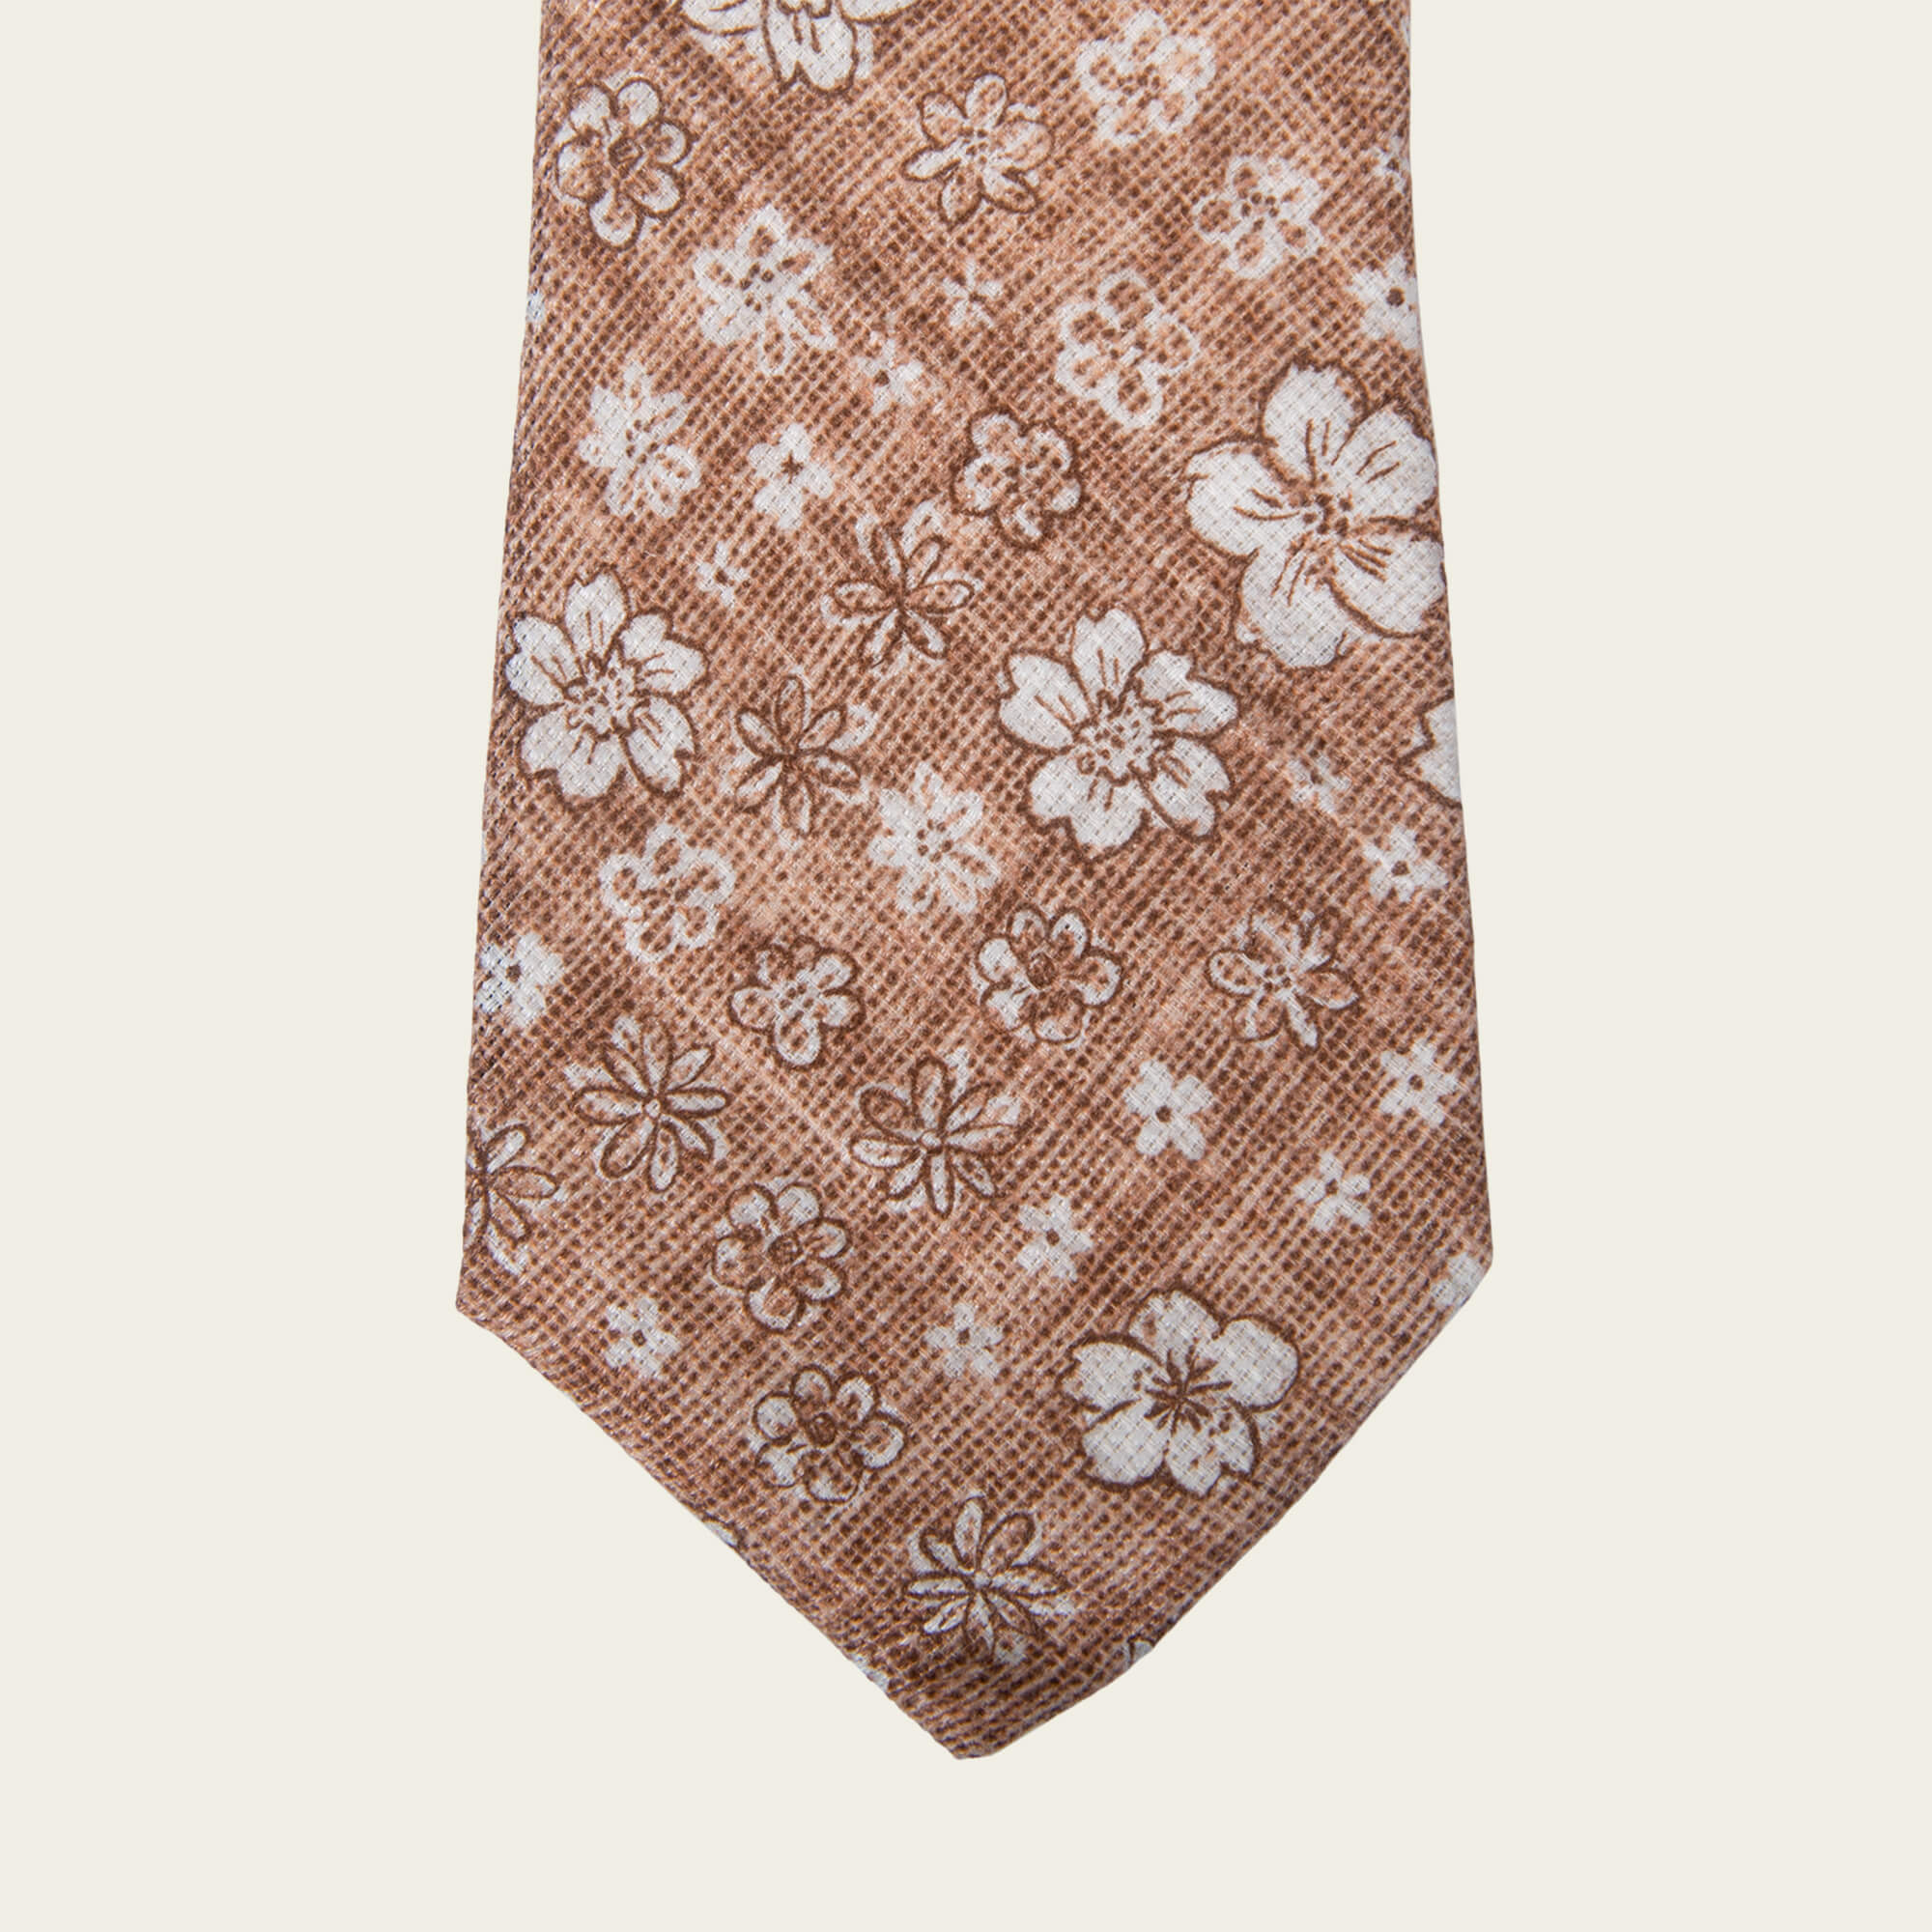 Peach With White Flowers Tie